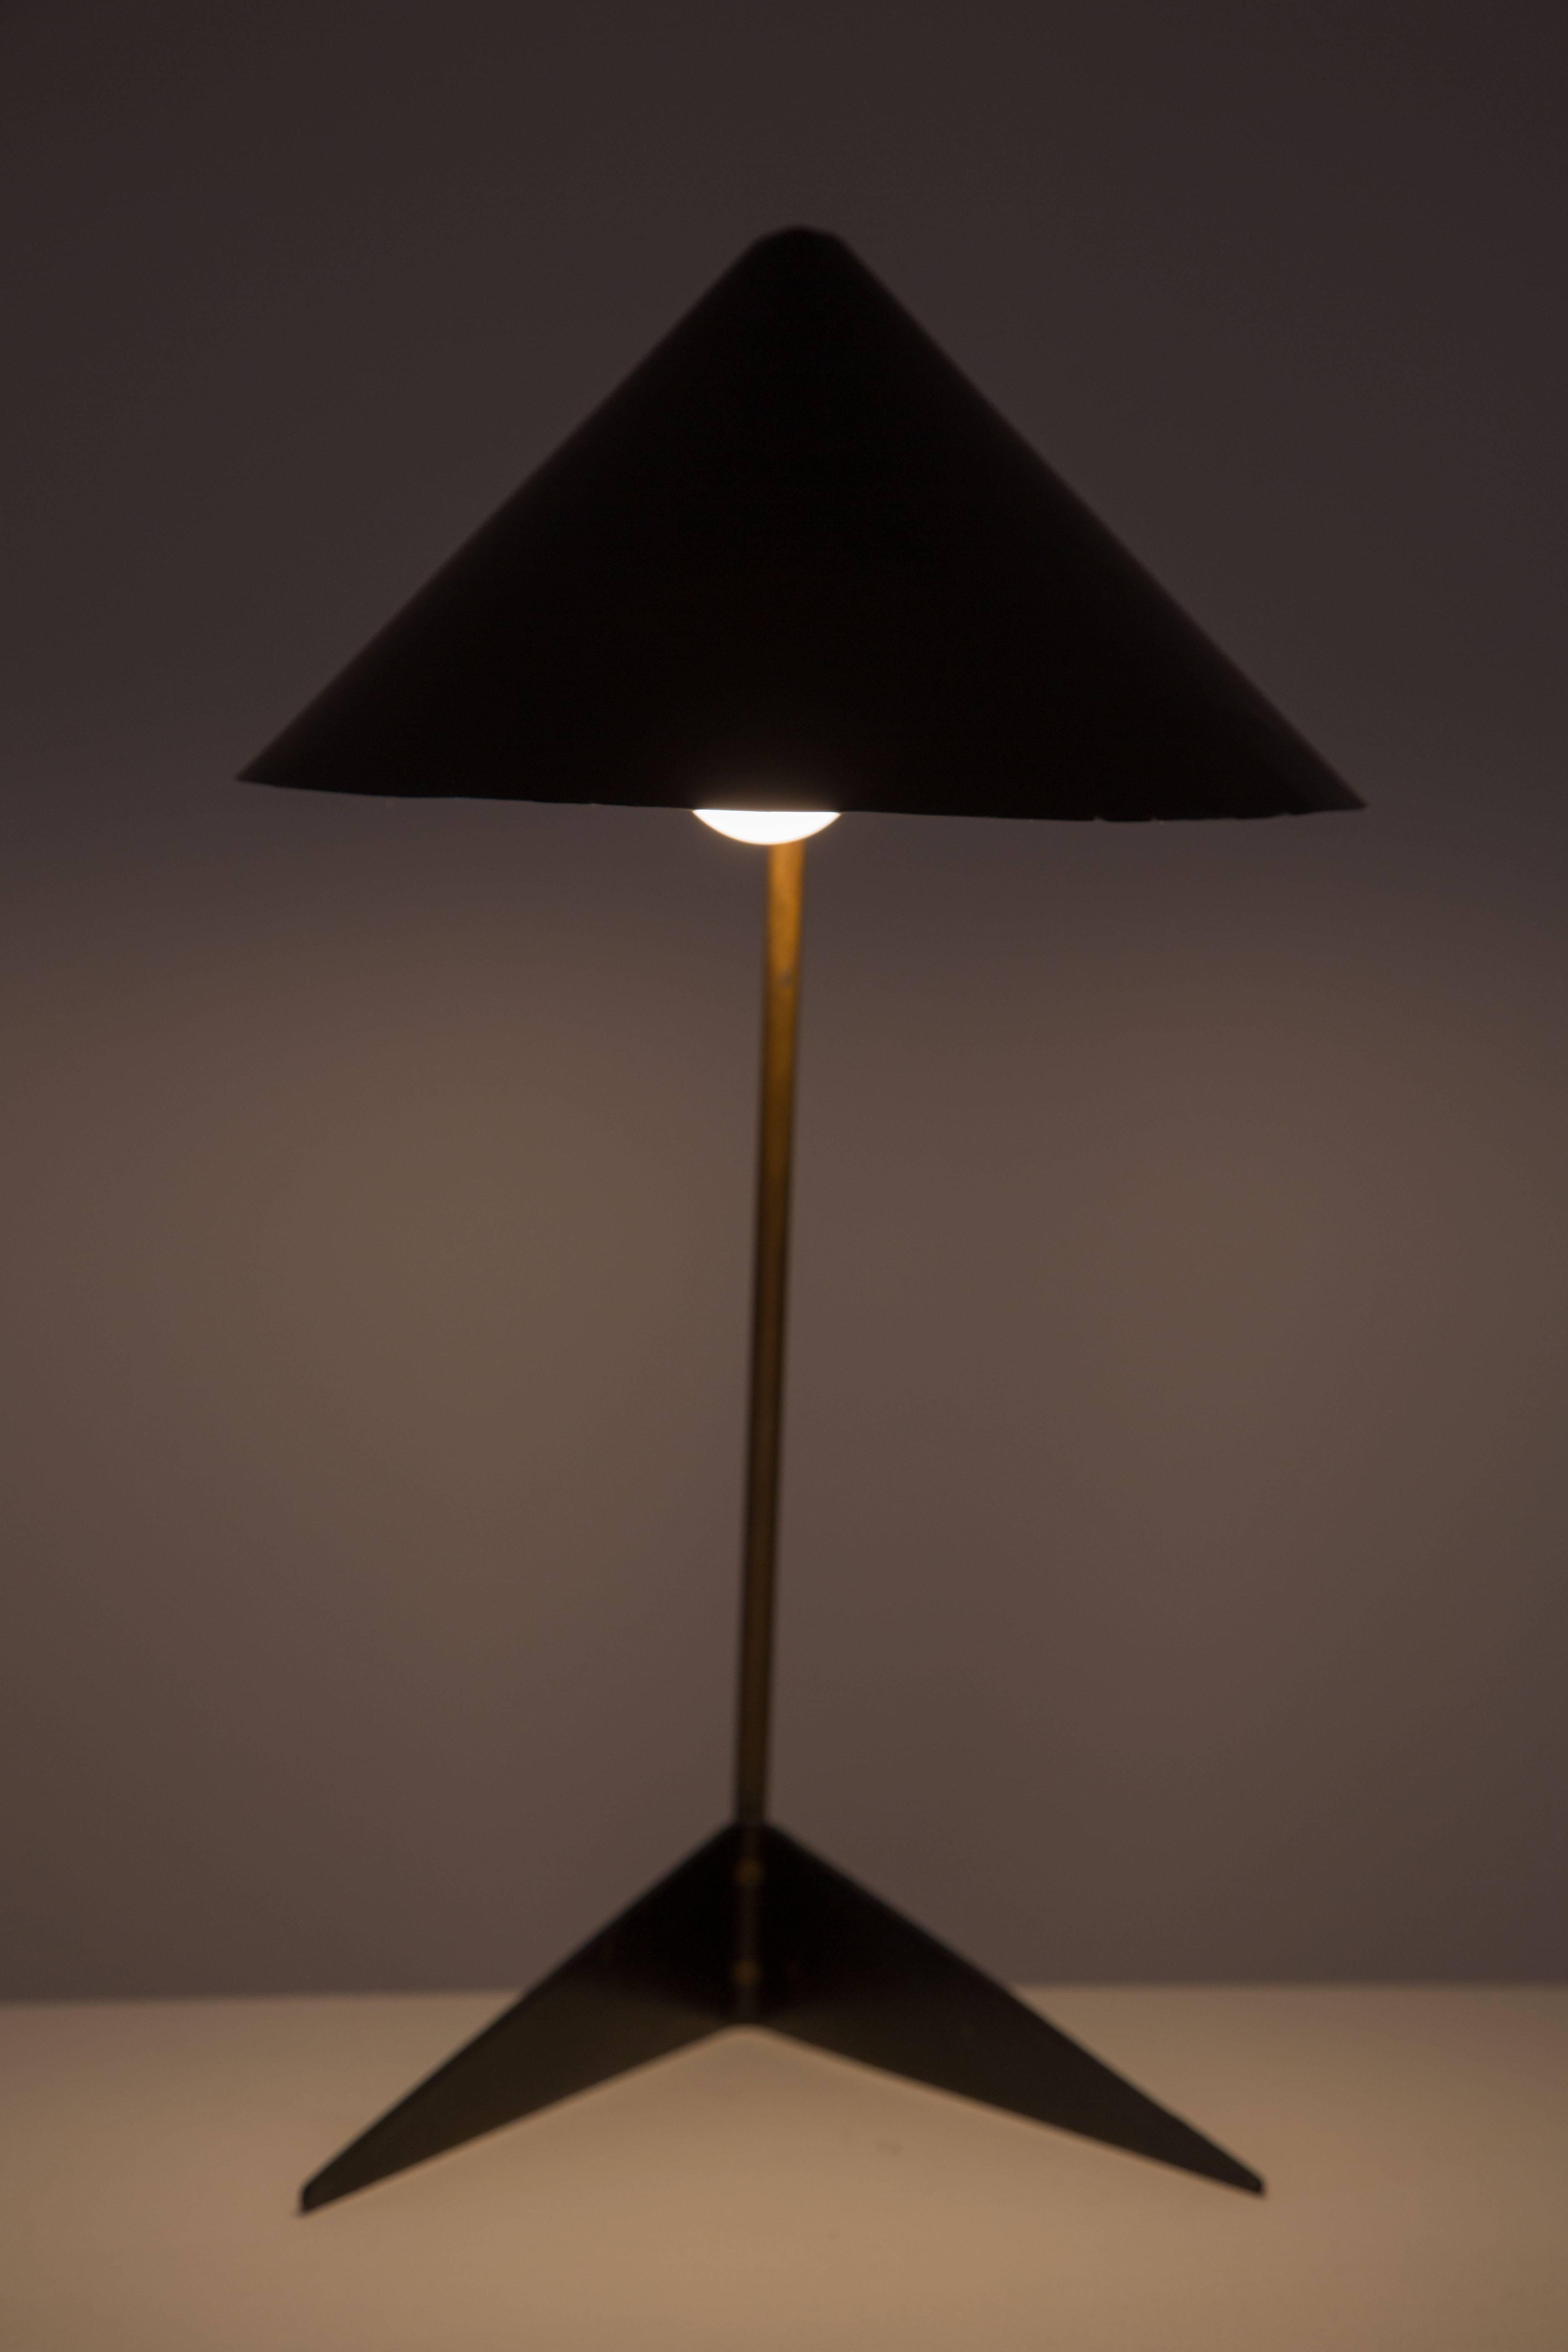 Brass and metal table lamp designed for RAAK. Adjustable shade, retains original label.